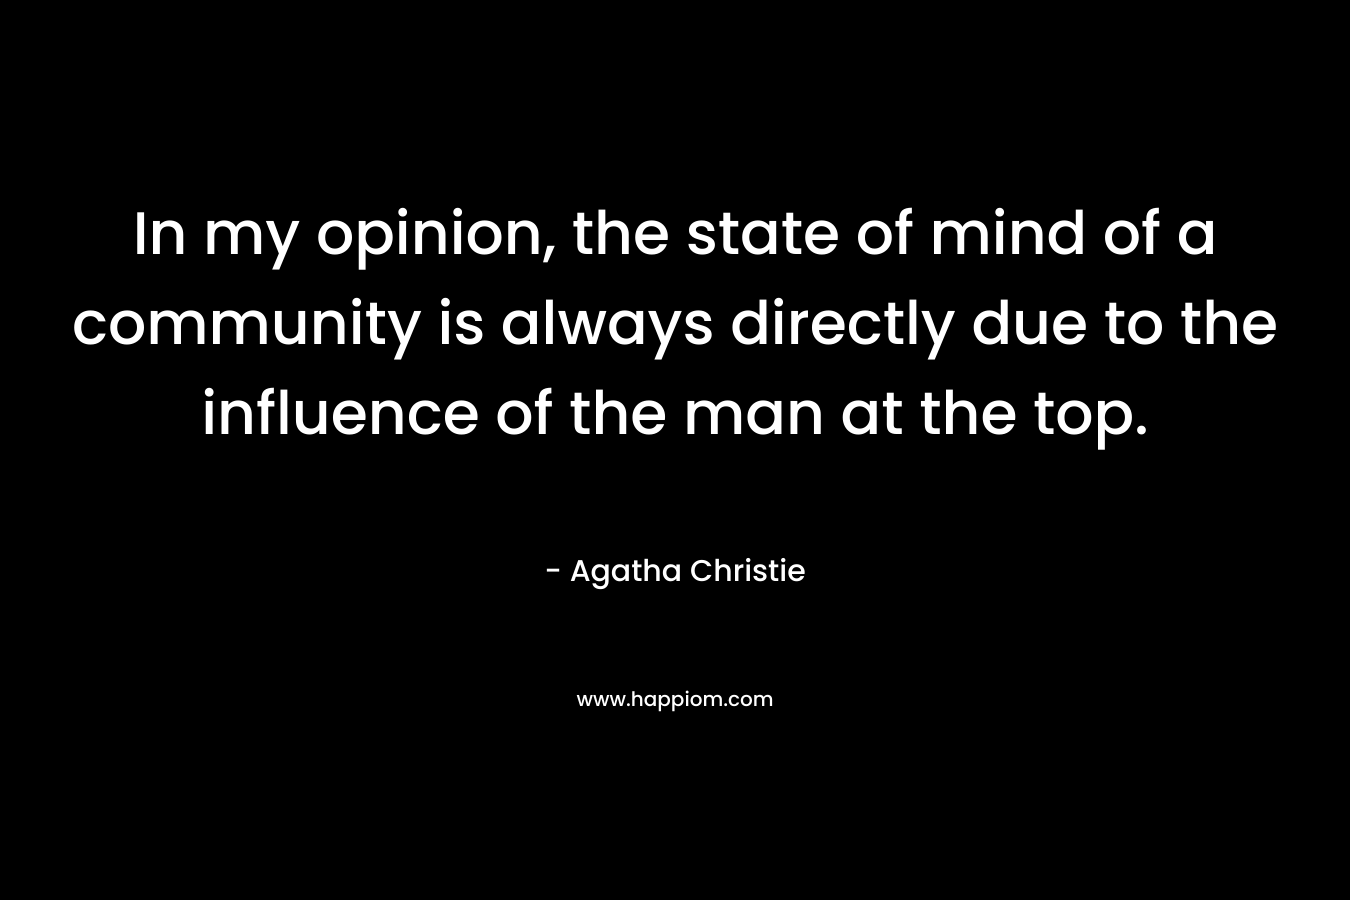 In my opinion, the state of mind of a community is always directly due to the influence of the man at the top.